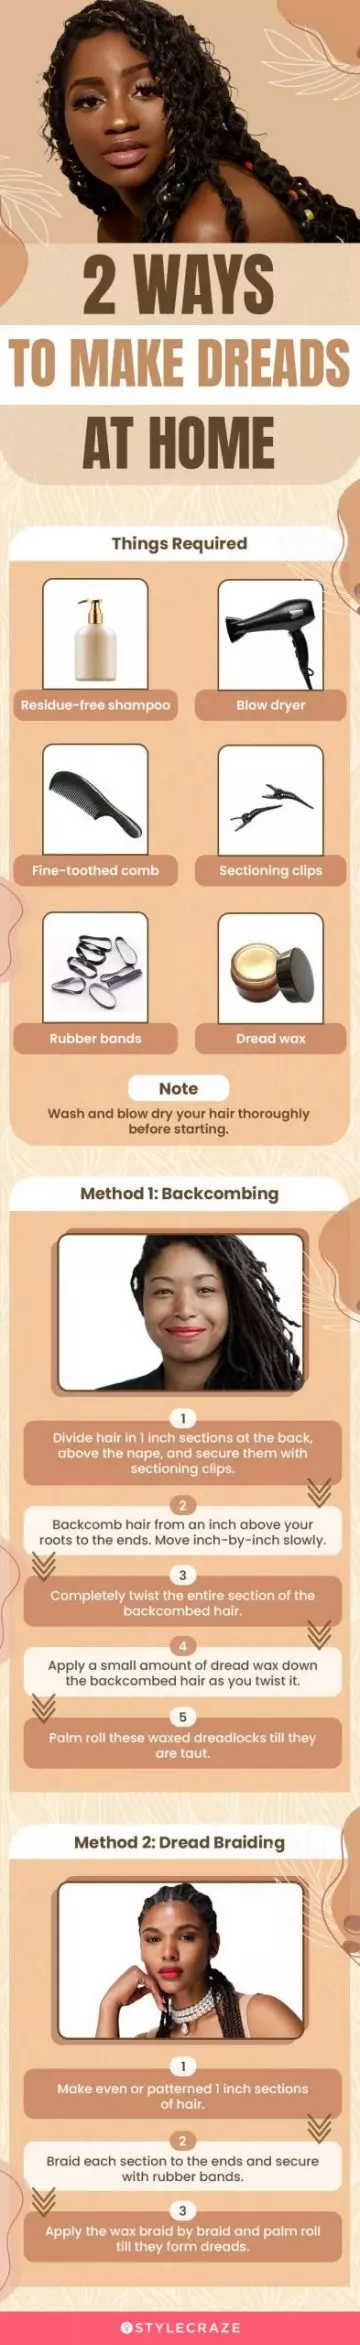 2 ways to make dreads at home (infographic)